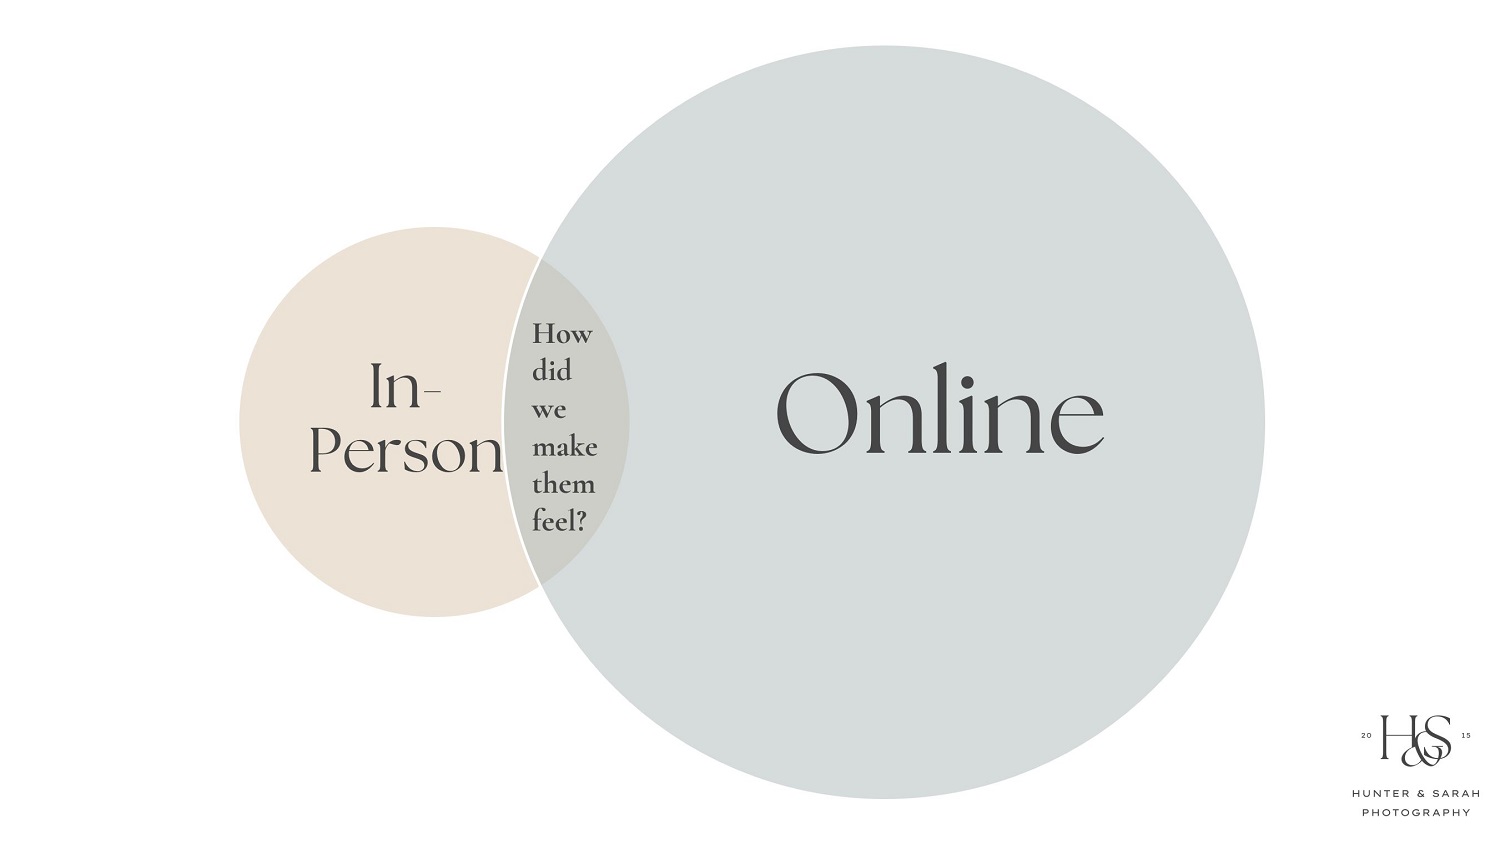 A venn diagram showing that online communication is a MUCH bigger part of how you interact with your clients than in-person communication